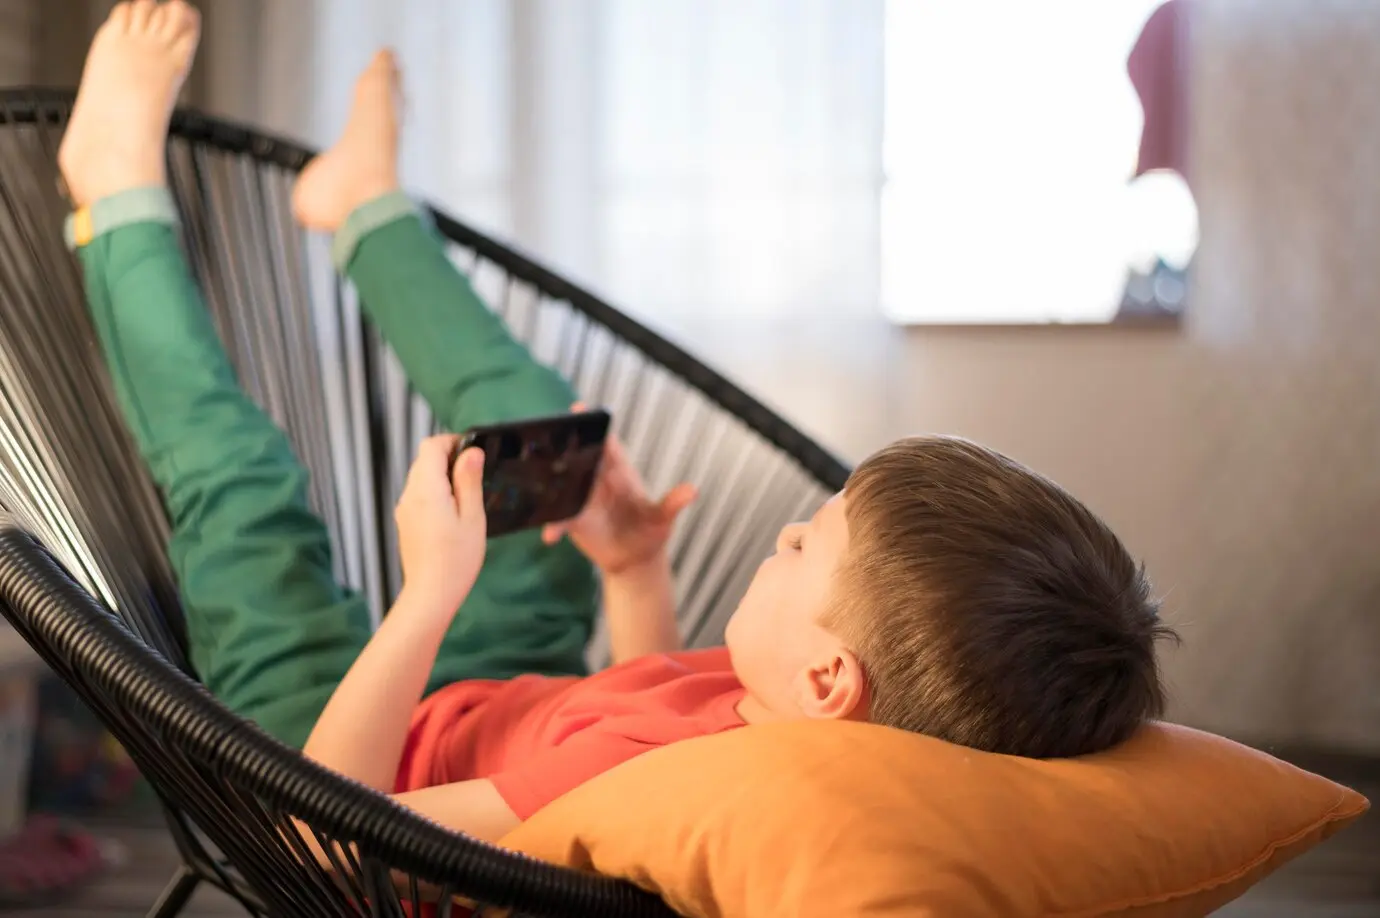 A boy lying on a chair playing with his mobile phone